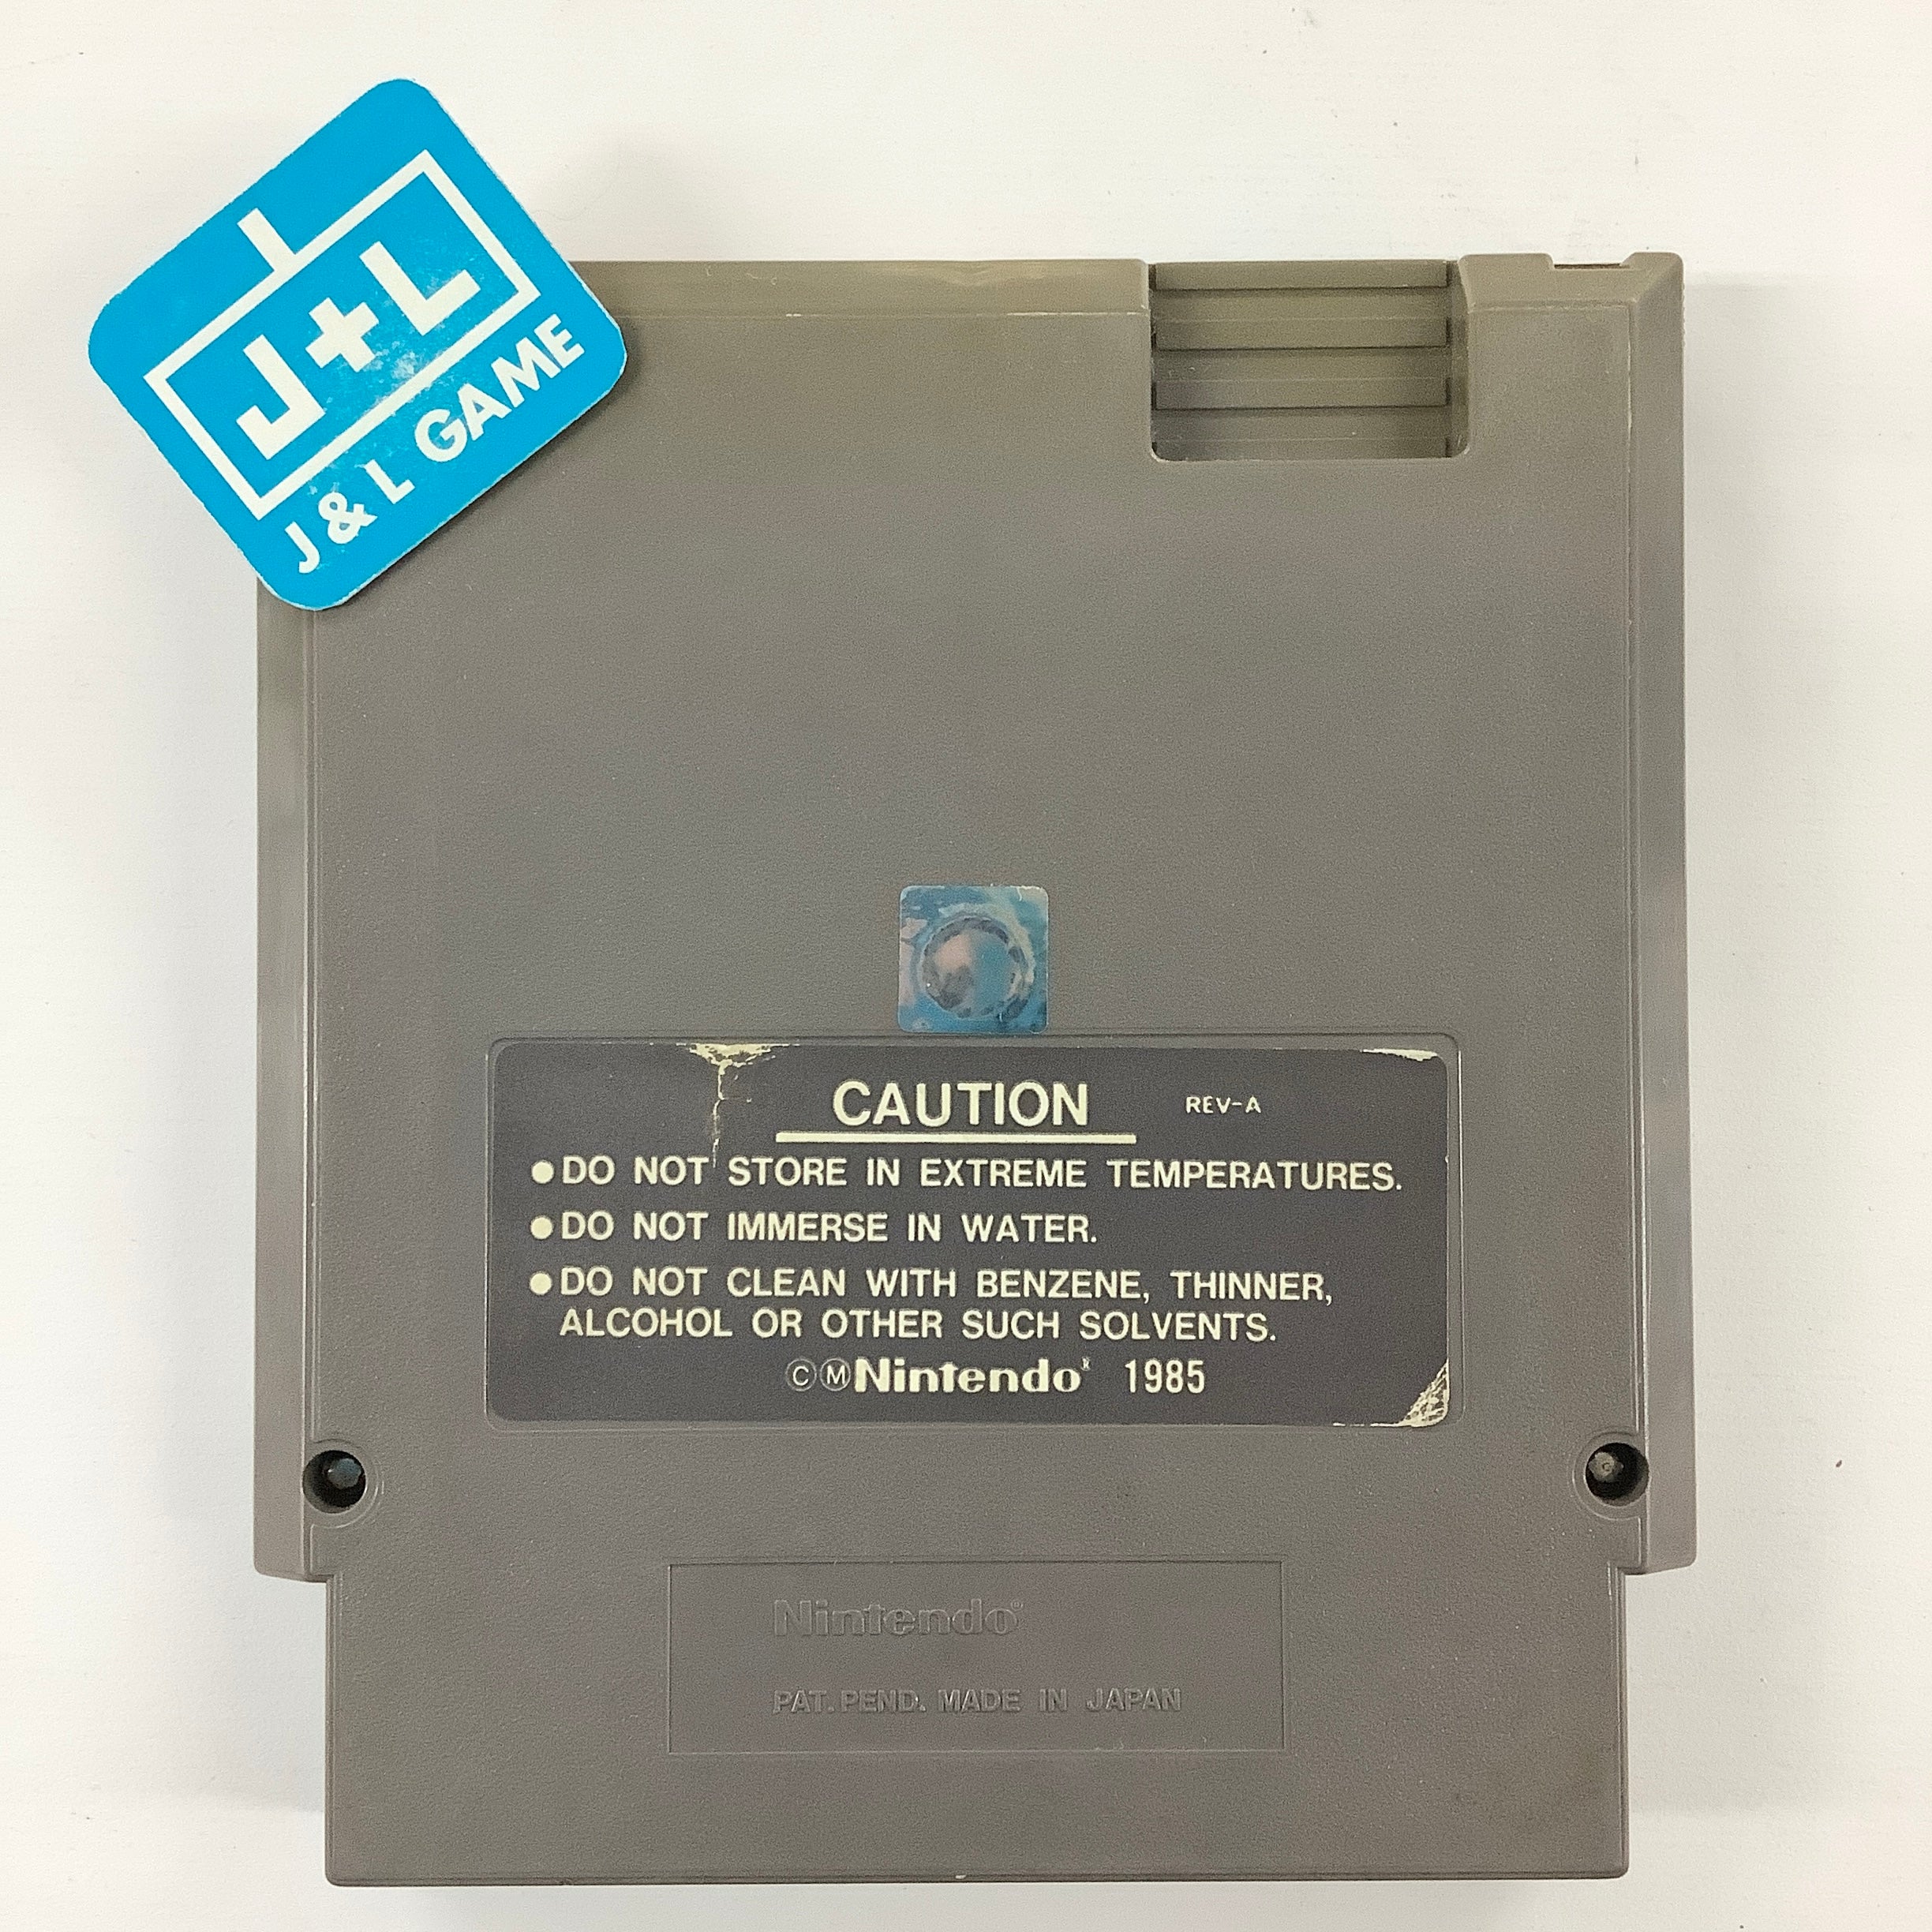 Galaxy 5000: Racing in the 51st Century - (NES) Nintendo Entertainment System [Pre-Owned] Video Games Activision   